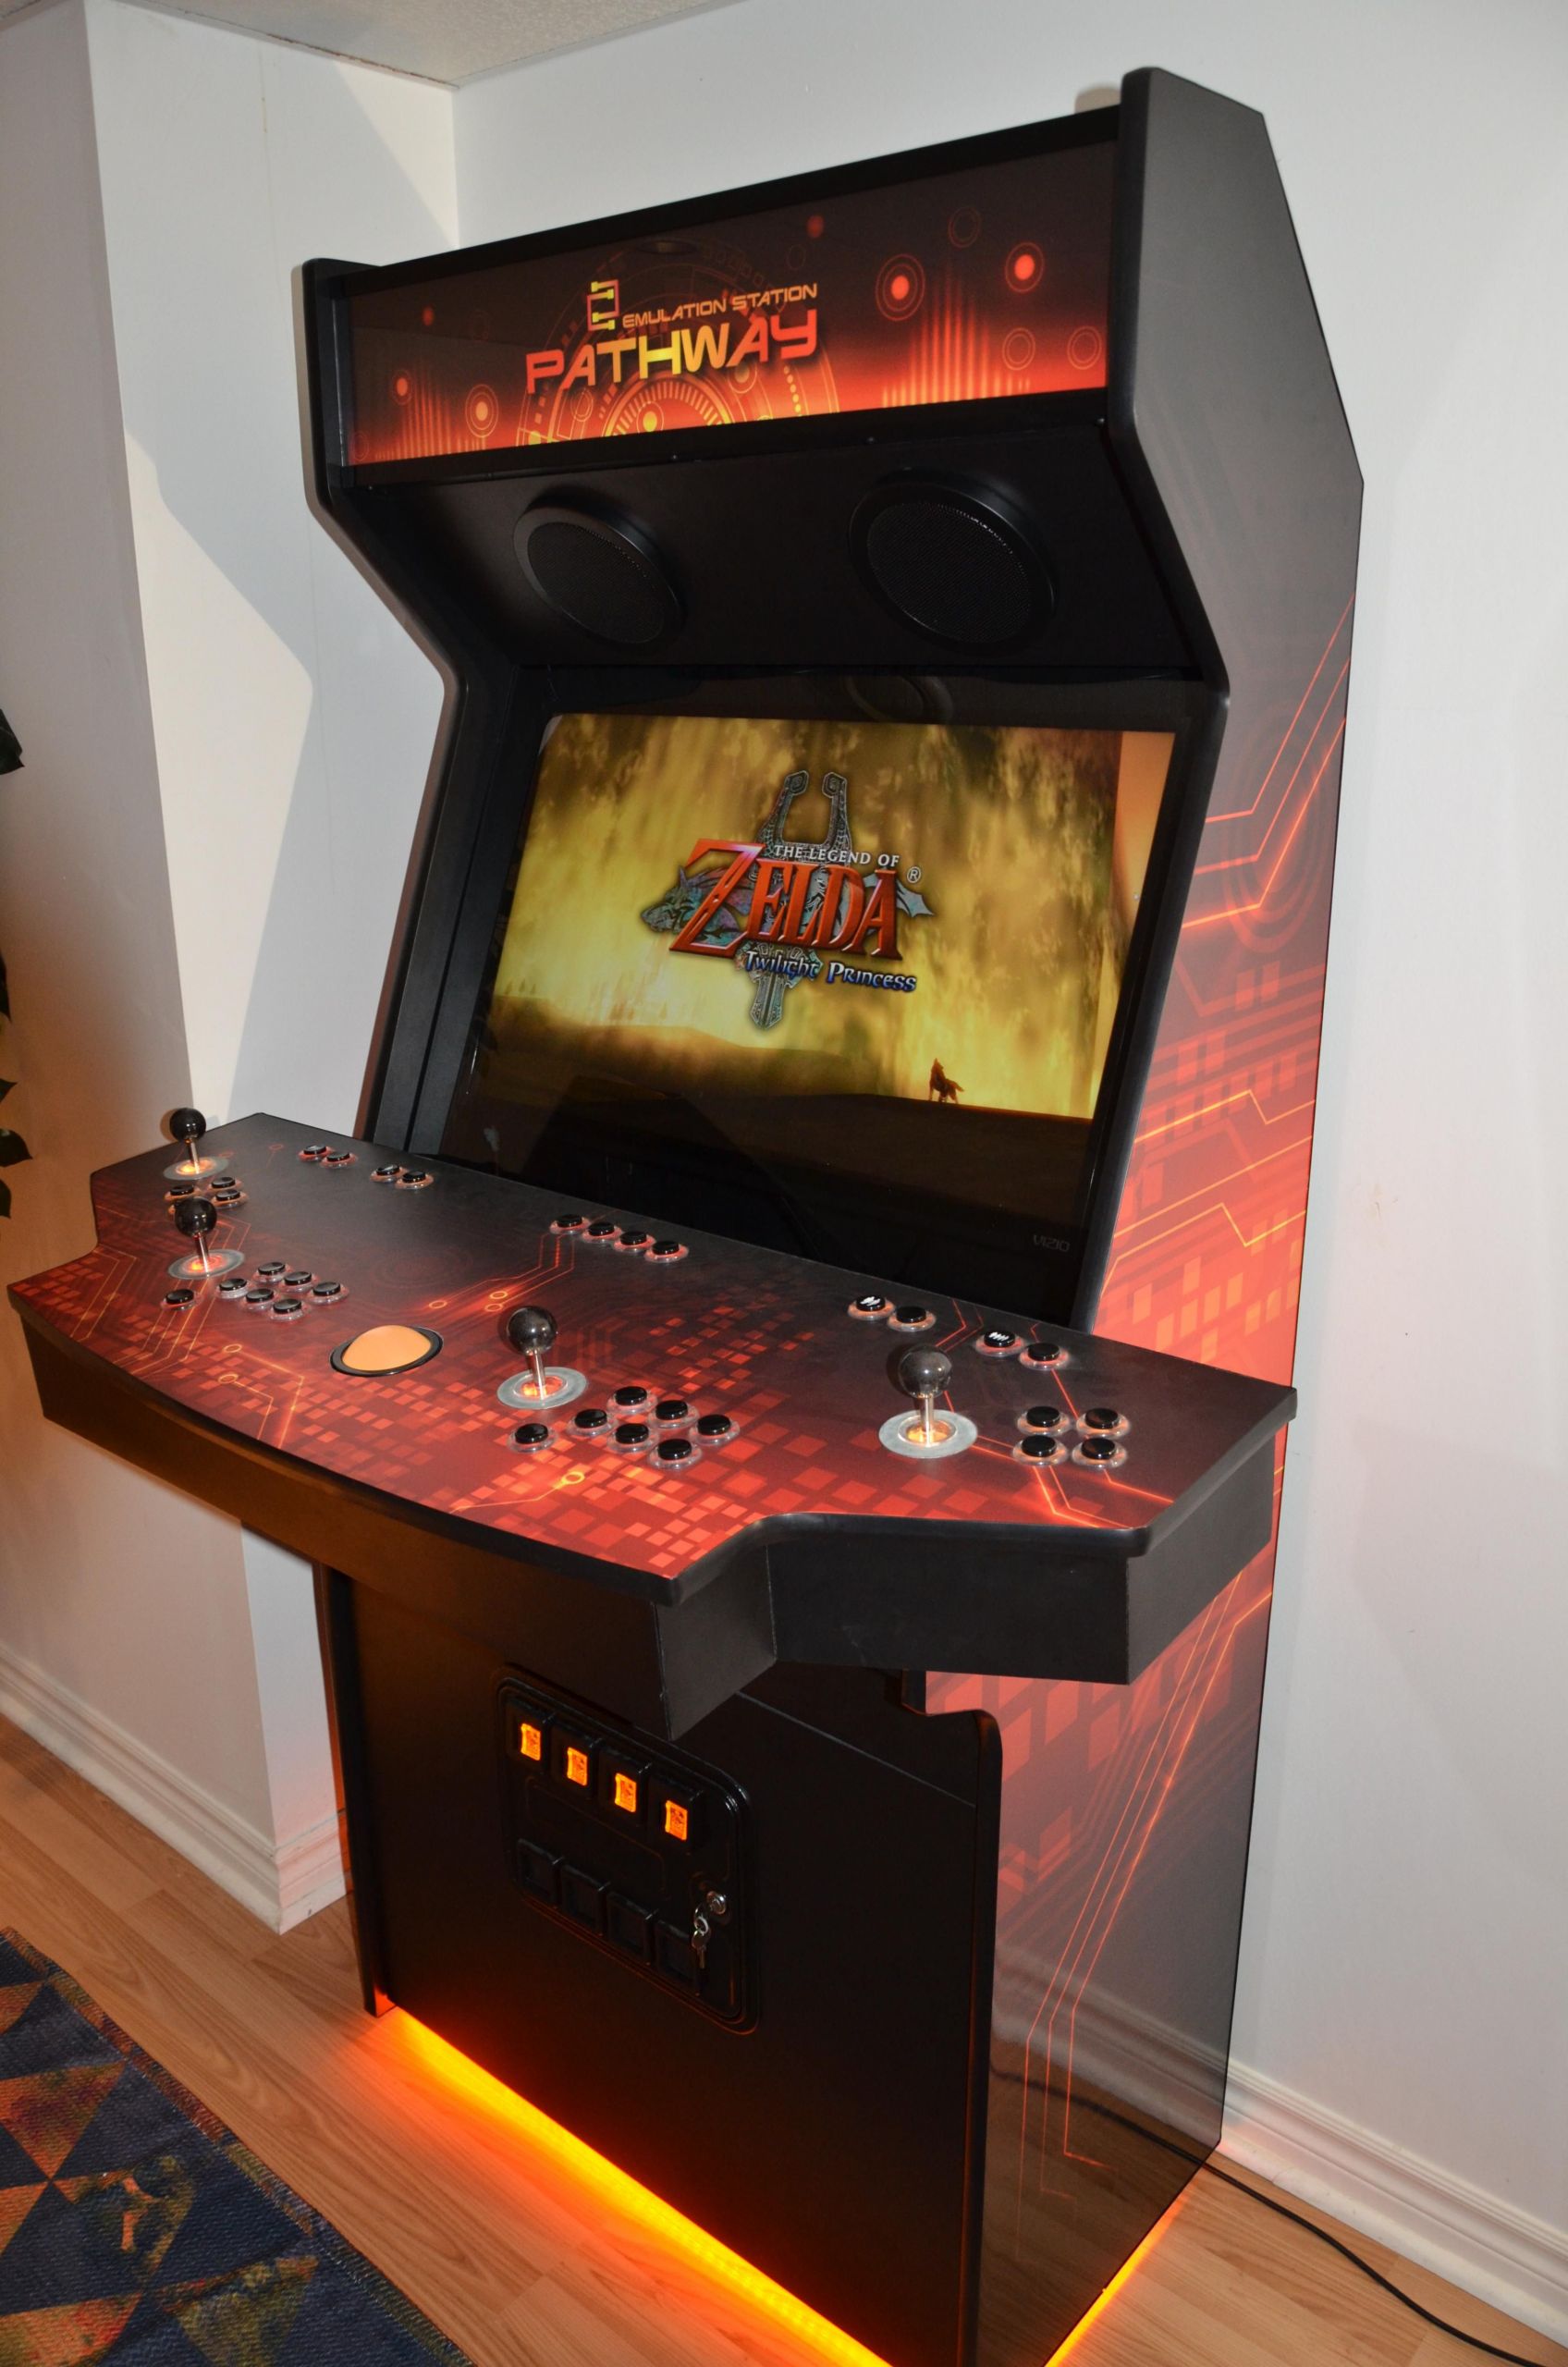 DIY Arcade Cabinet Plans
 Pathway Cabinet Build FINISHED